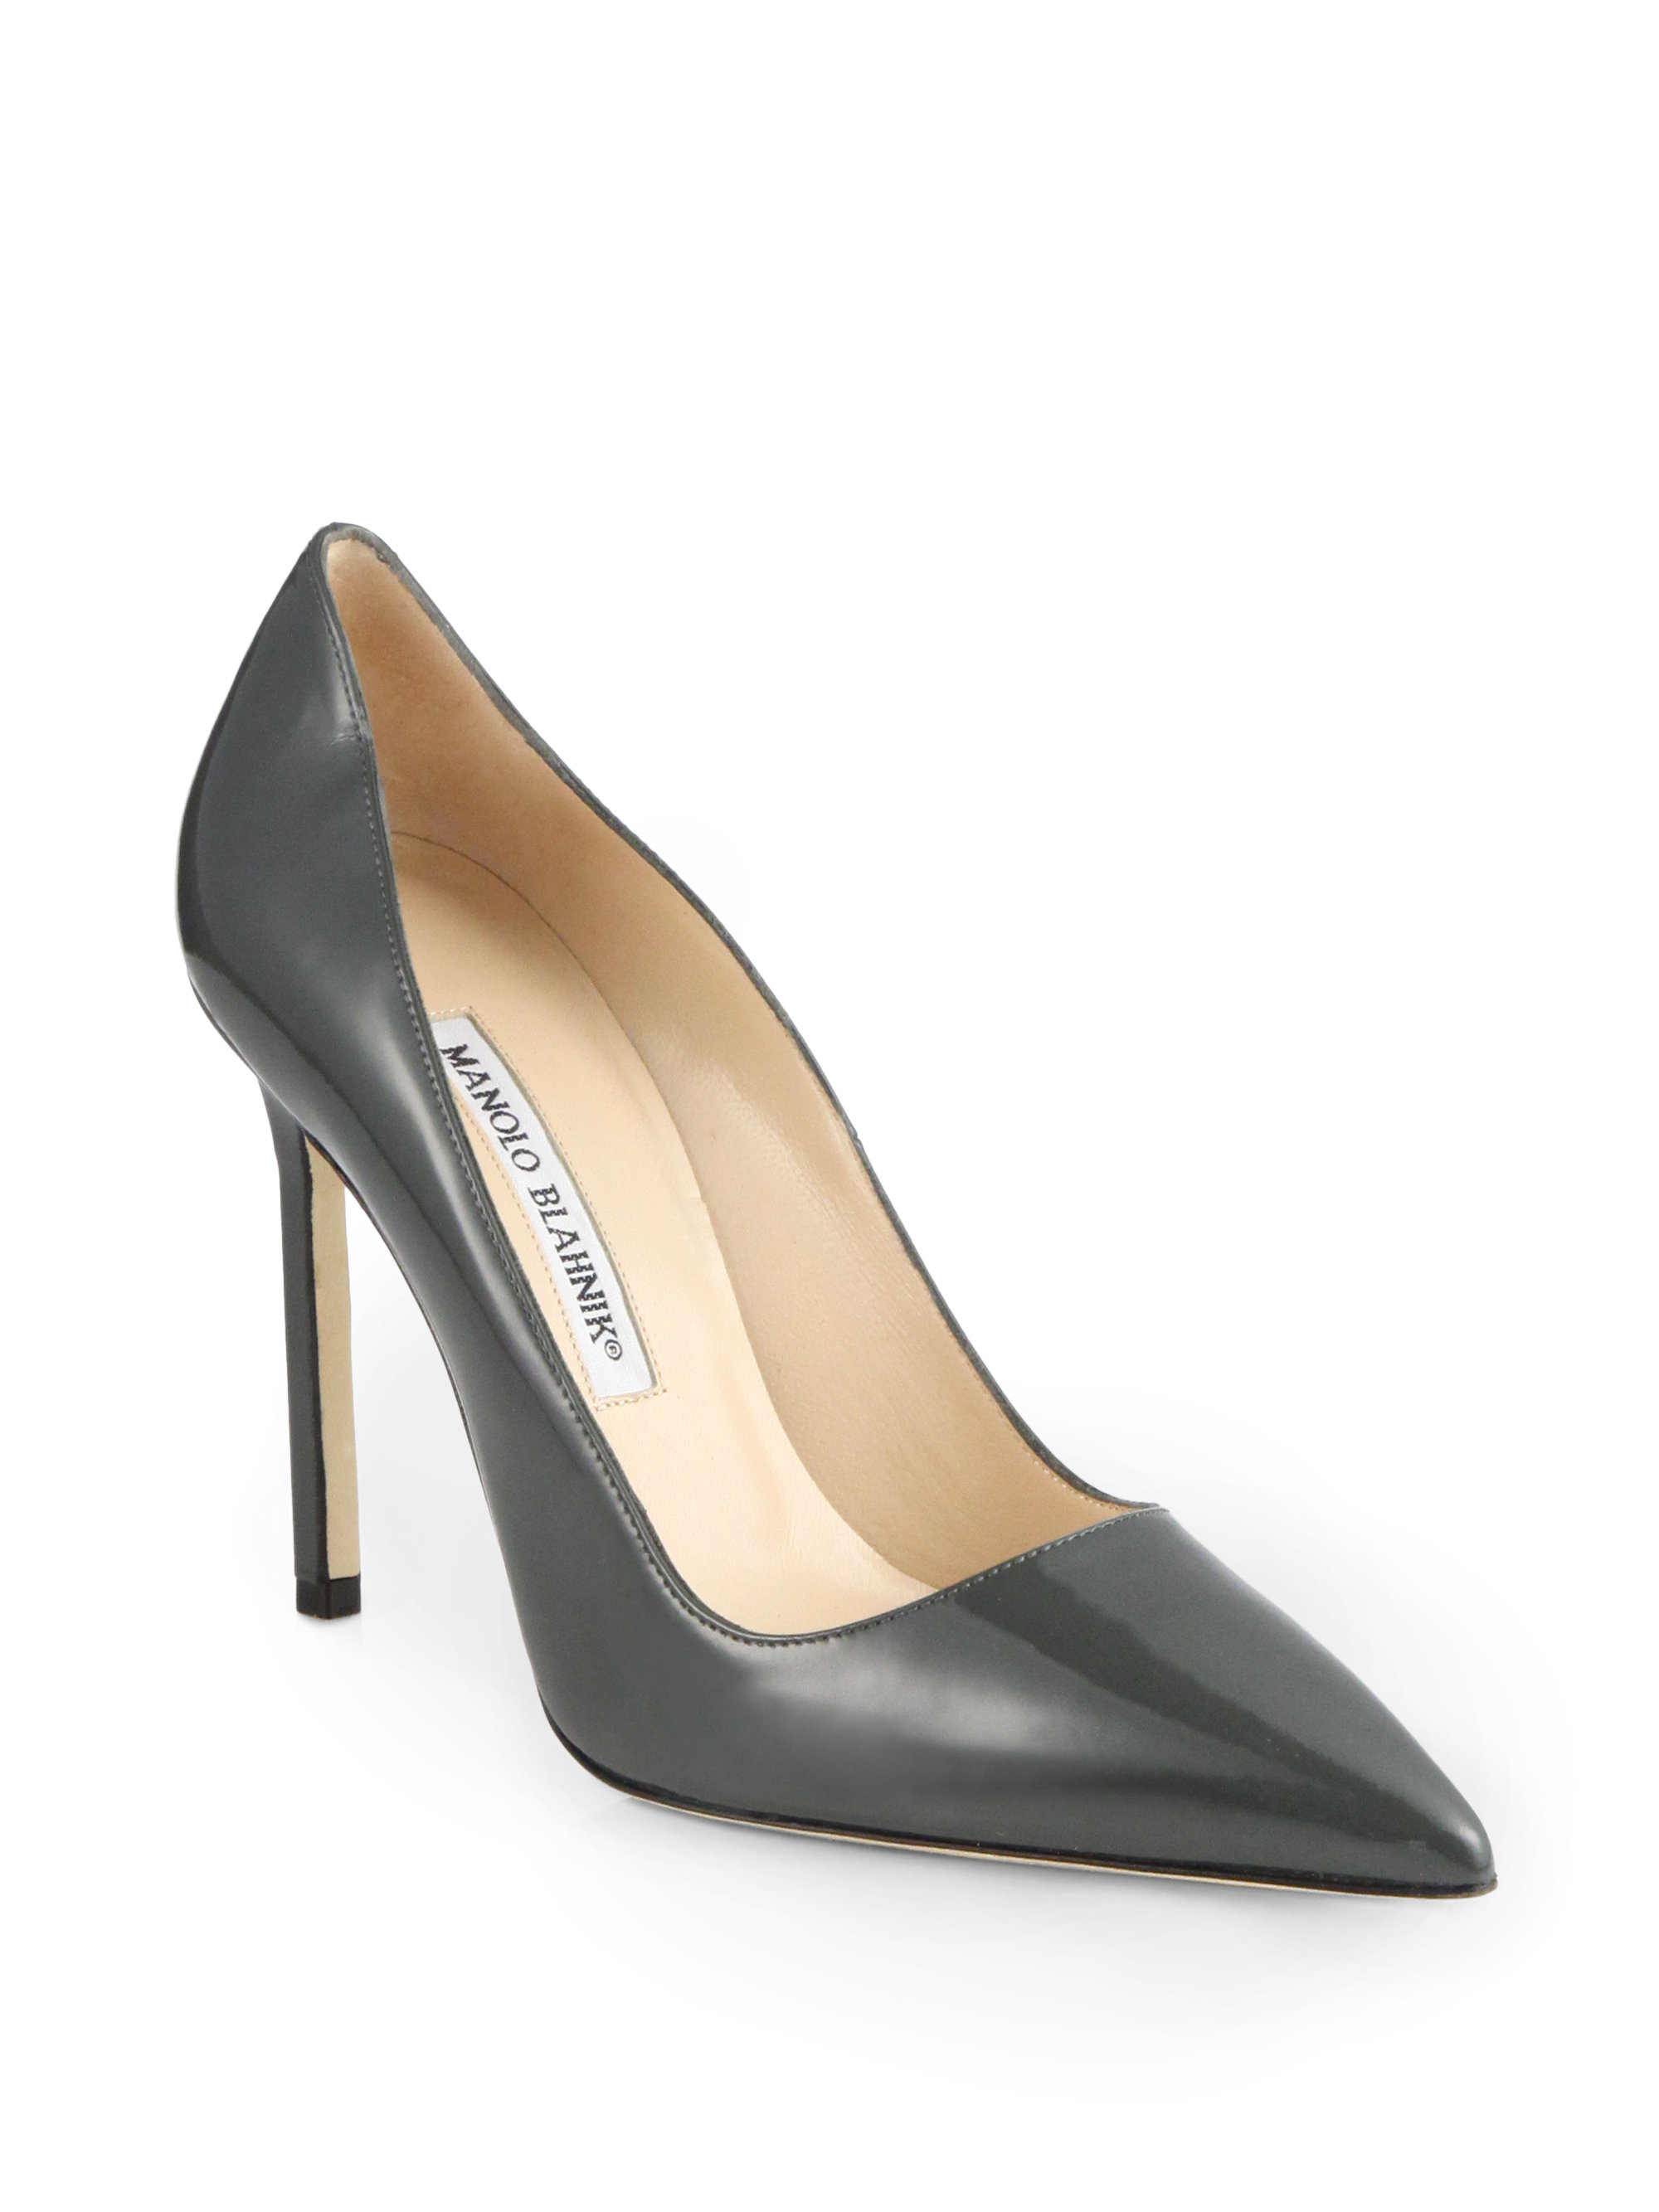 Manolo blahnik Bb 105 Patent Leather Point Toe Pumps in Gray | Lyst